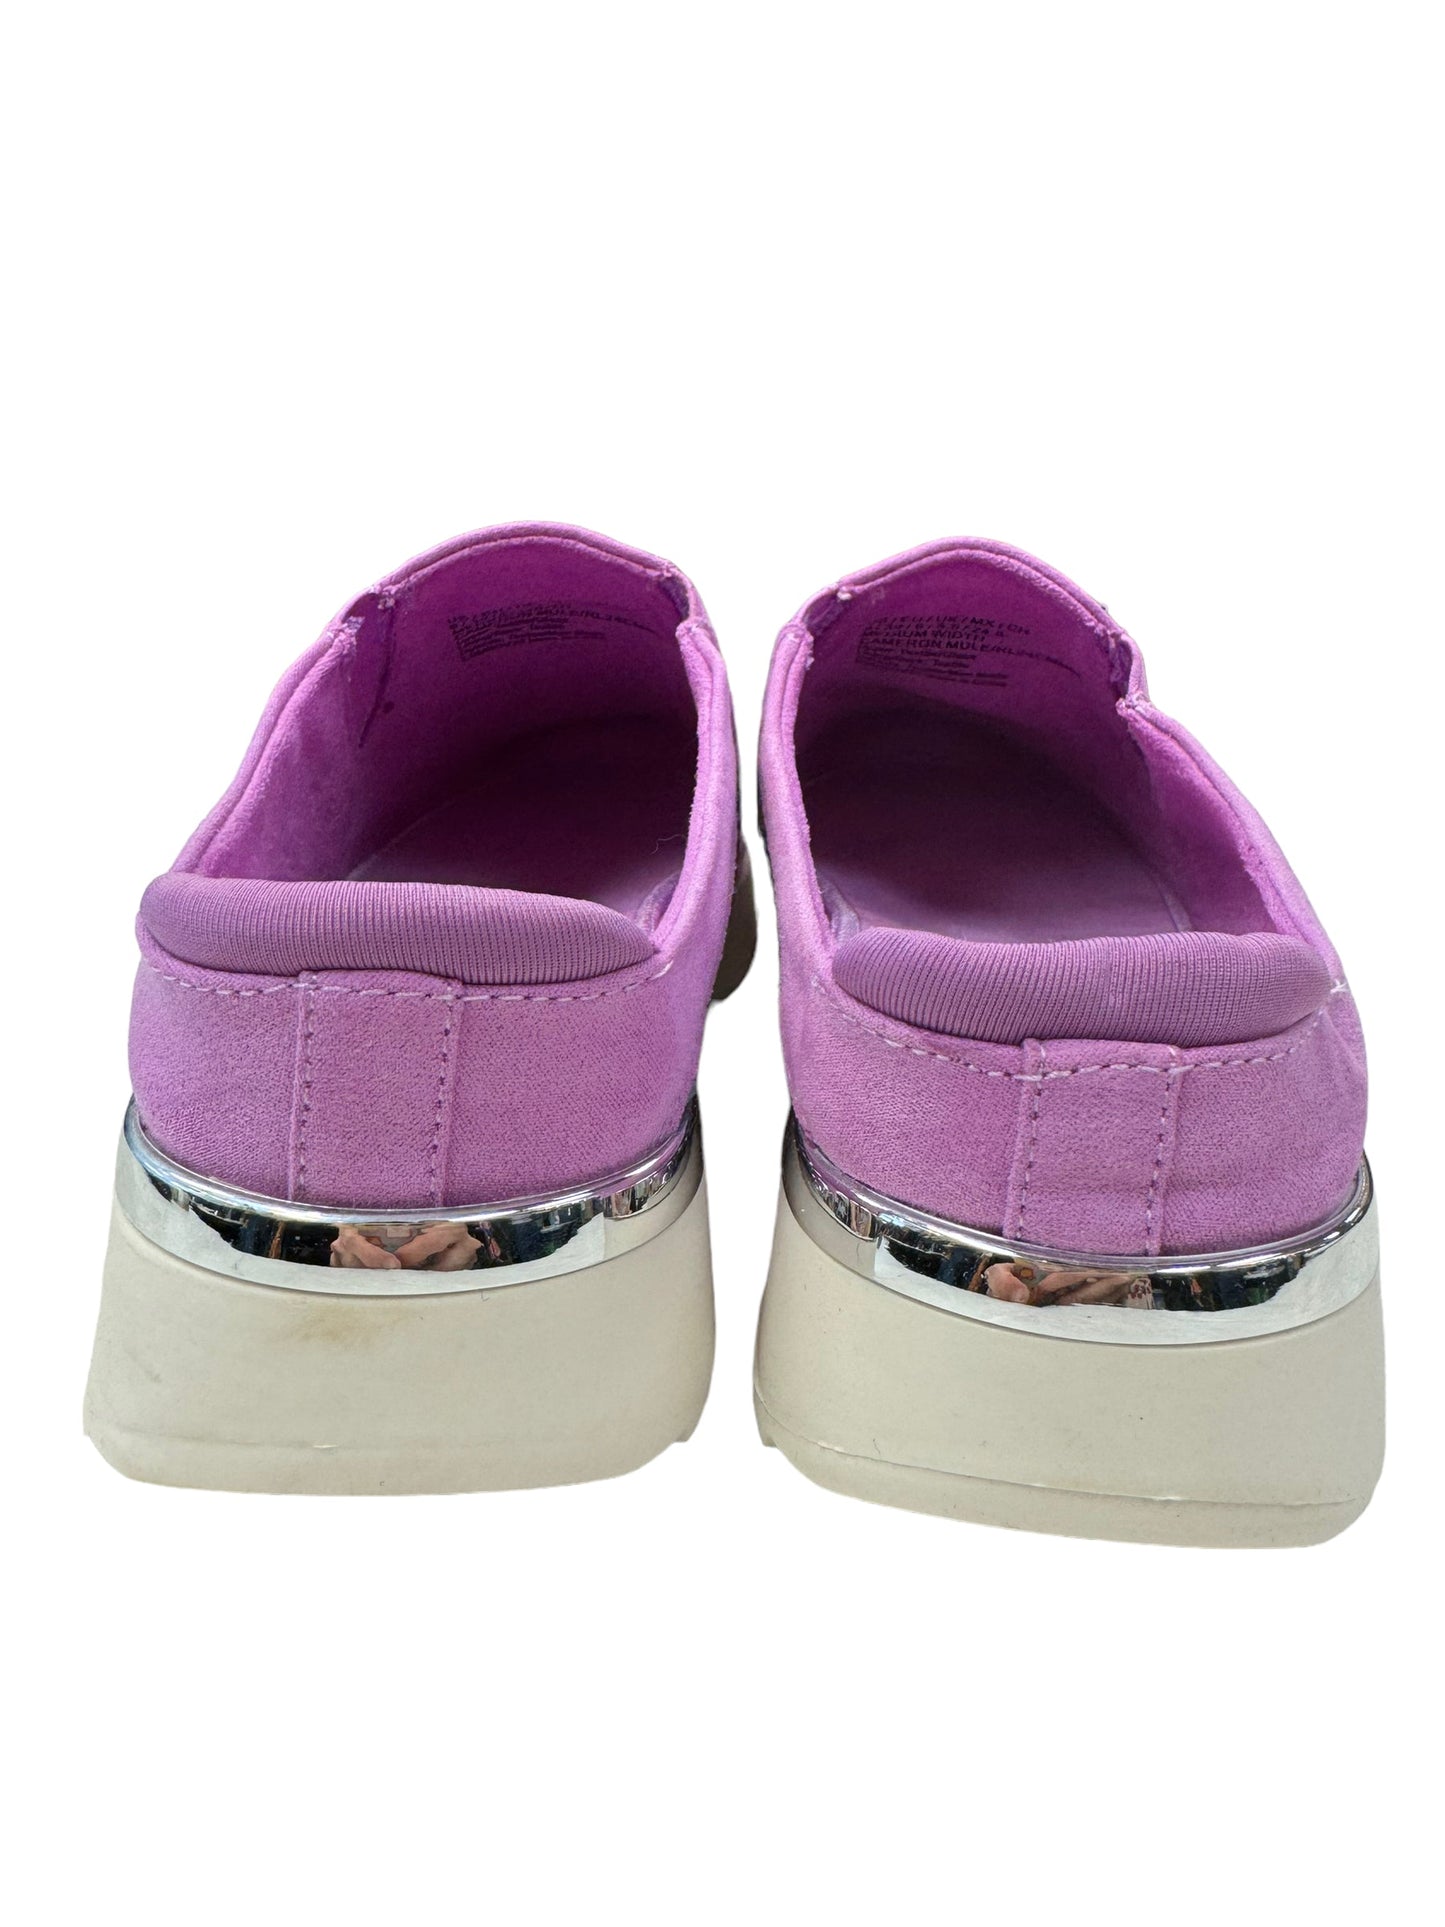 Purple Shoes Sneakers Kenneth Cole Reaction, Size 8